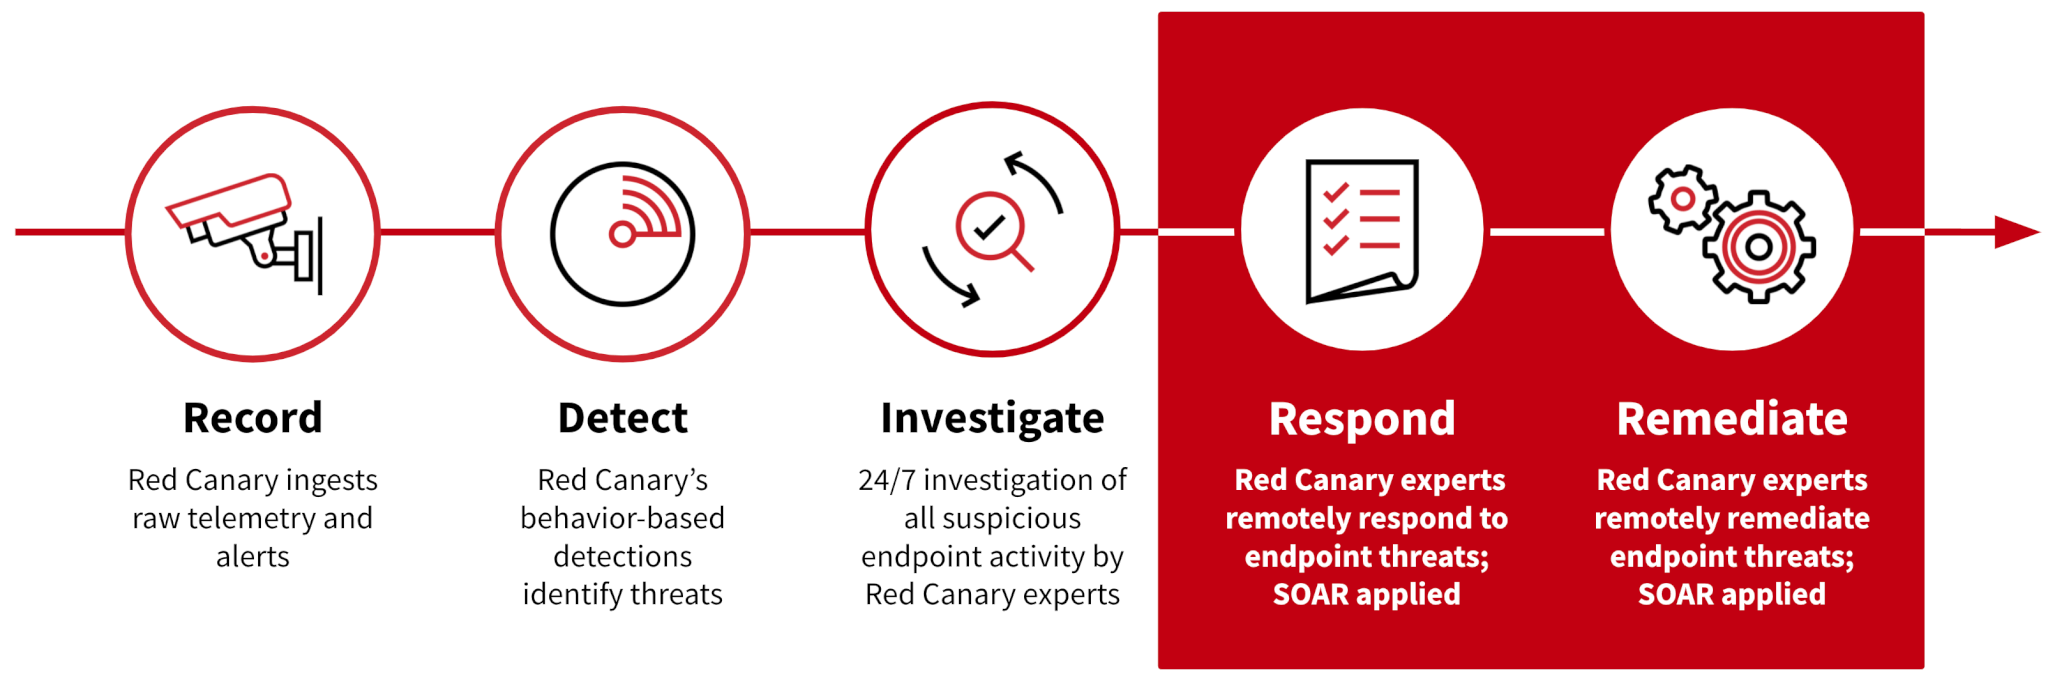 Record, Detect, and Investigate all lead to Respond and Remediate